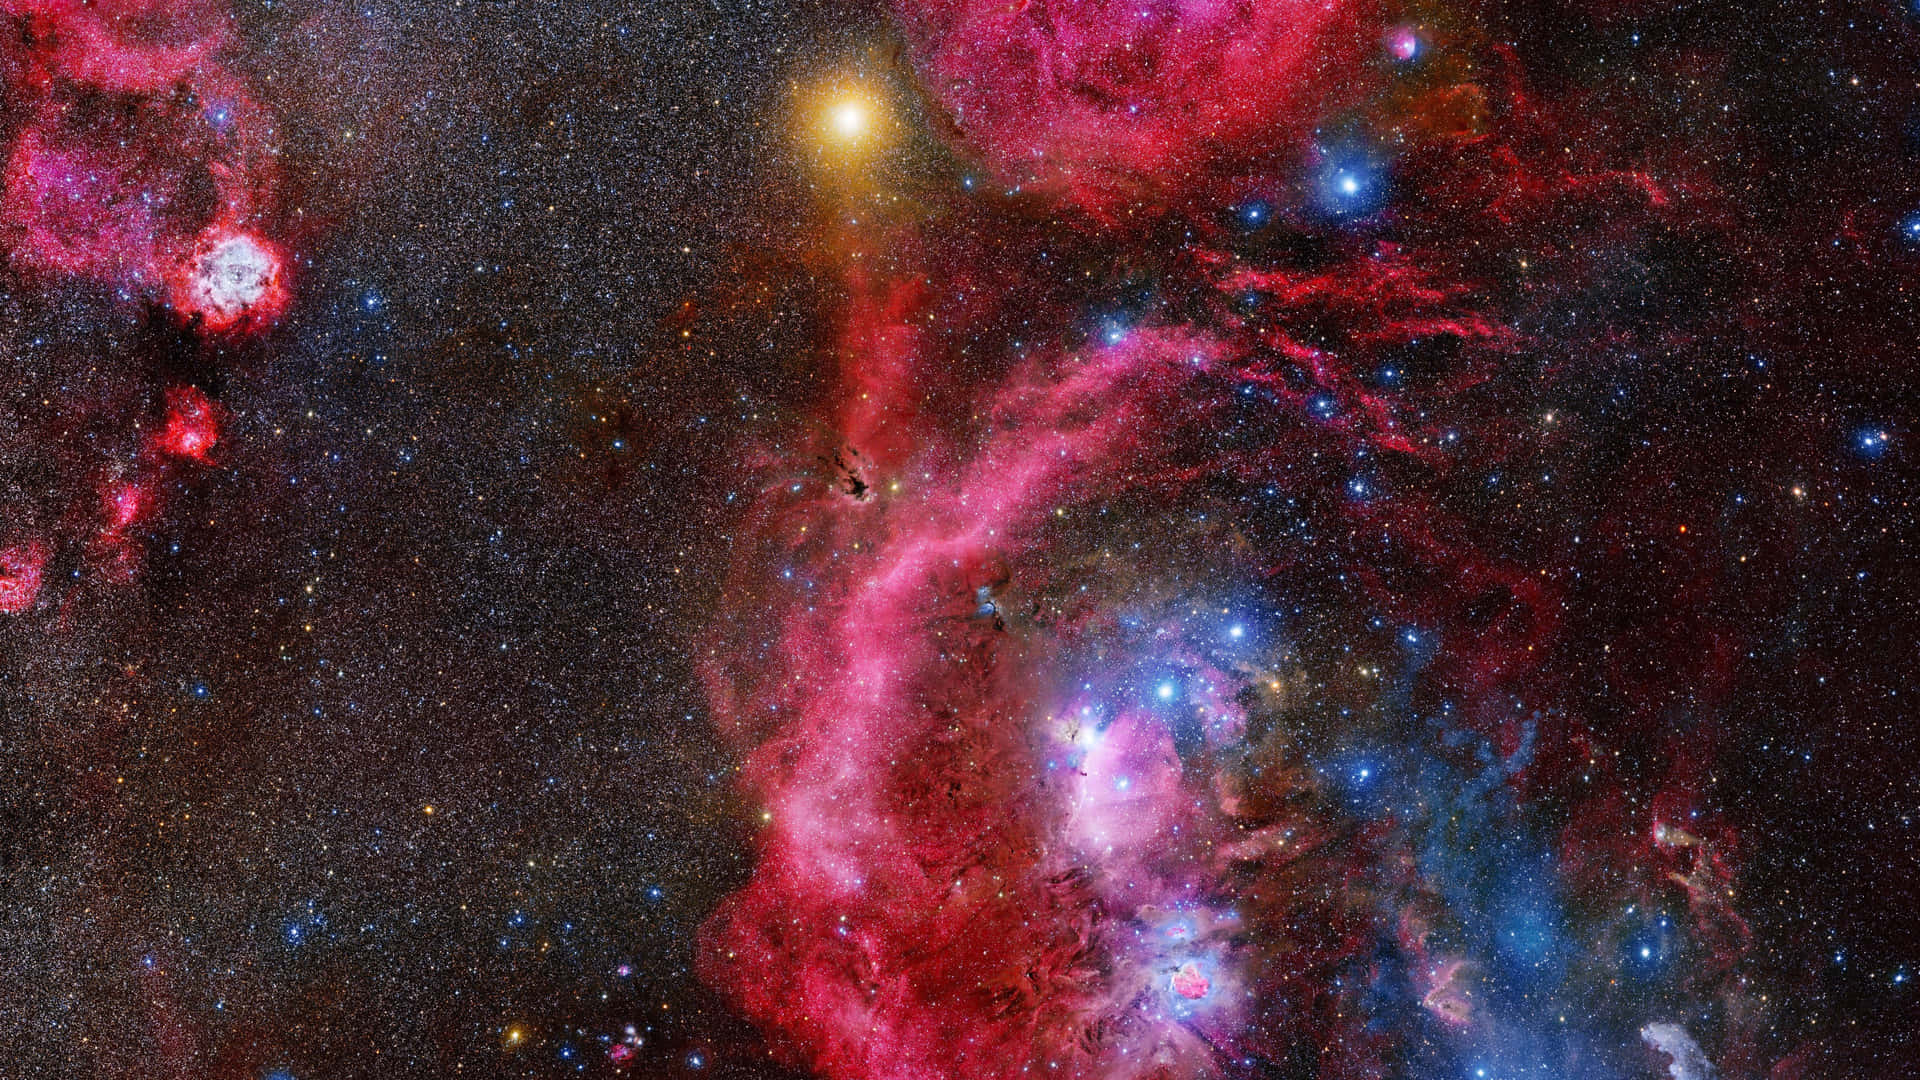 The bright stars of Orion, captured against a backdrop of a dark night sky.